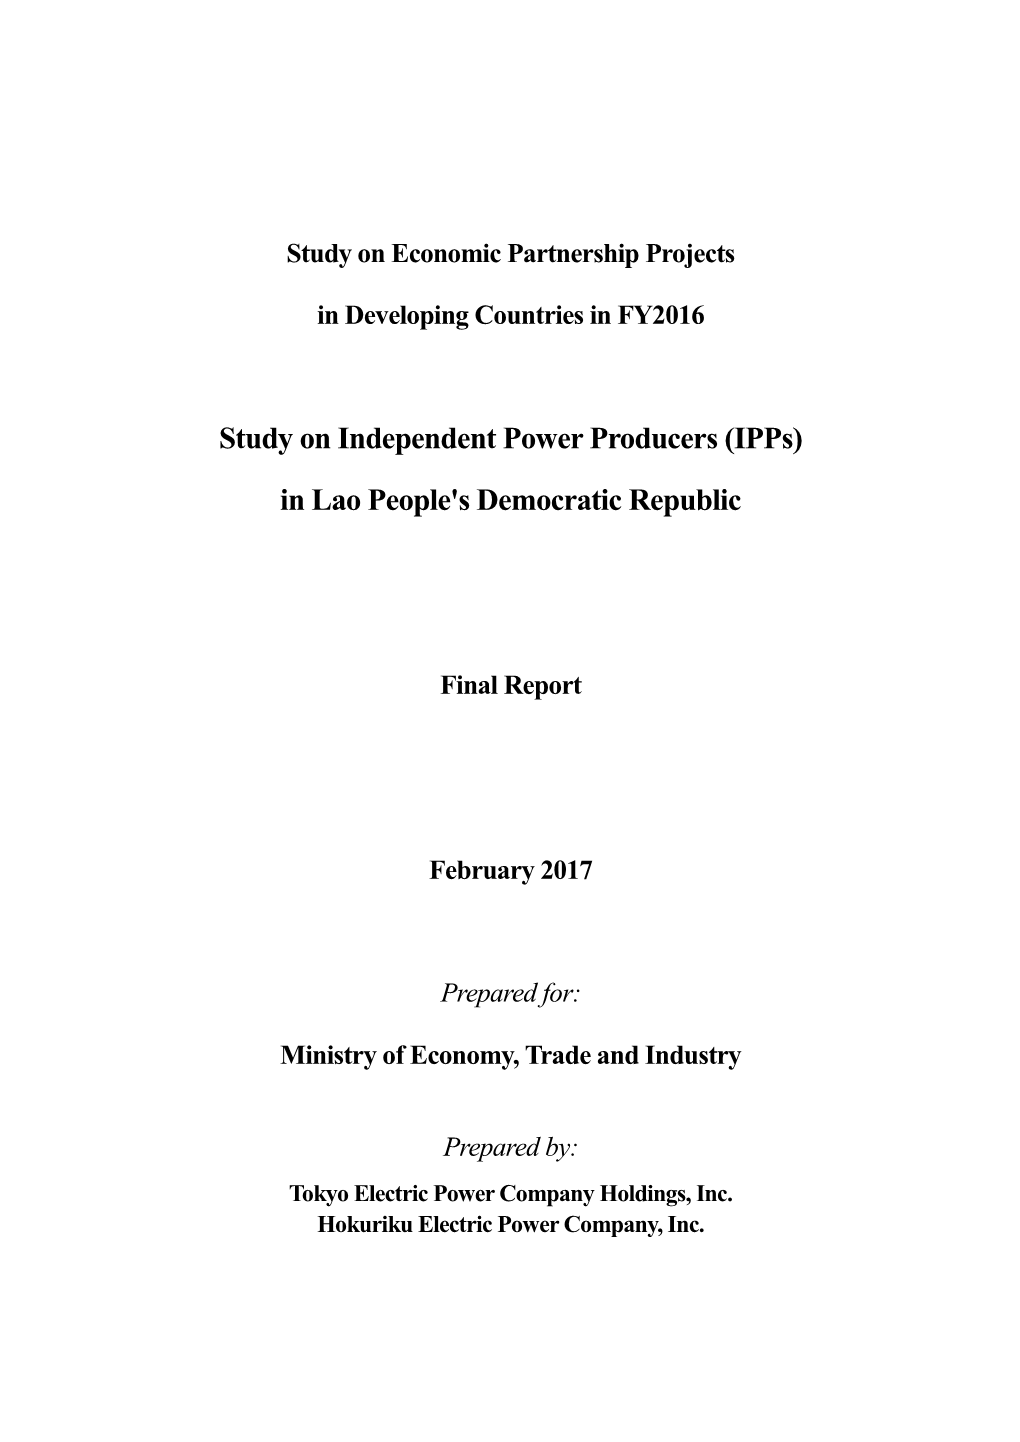 Study on Independent Power Producers (Ipps) in Lao People's Democratic Republic